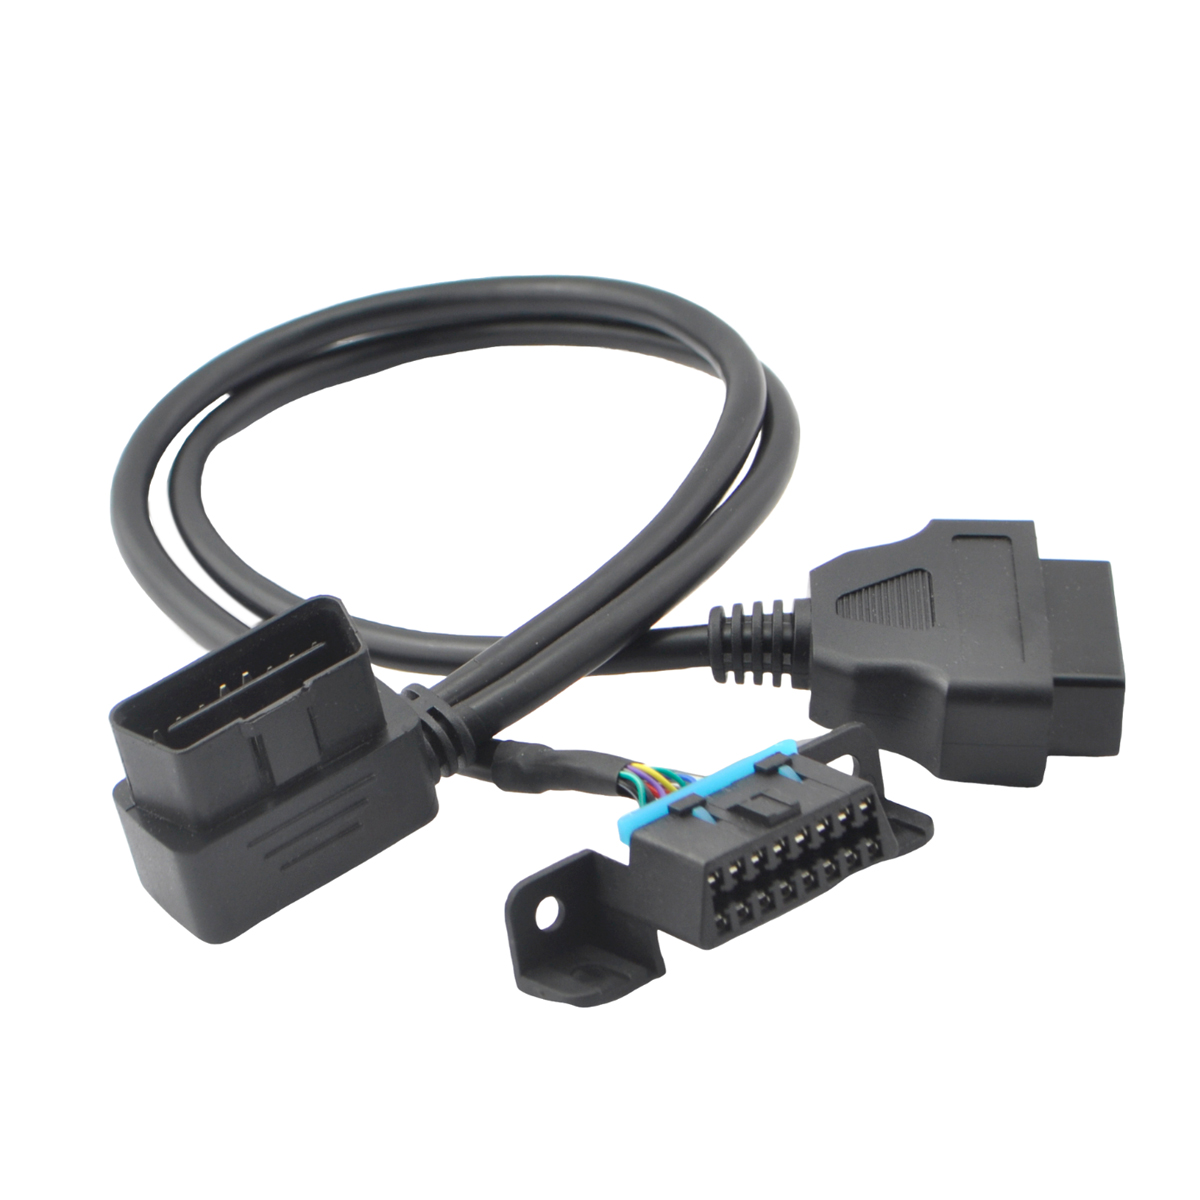 Right Angle OBD2 Male to 2 Female Splitter for Buick Chevrolet [40205] -  $15.99 